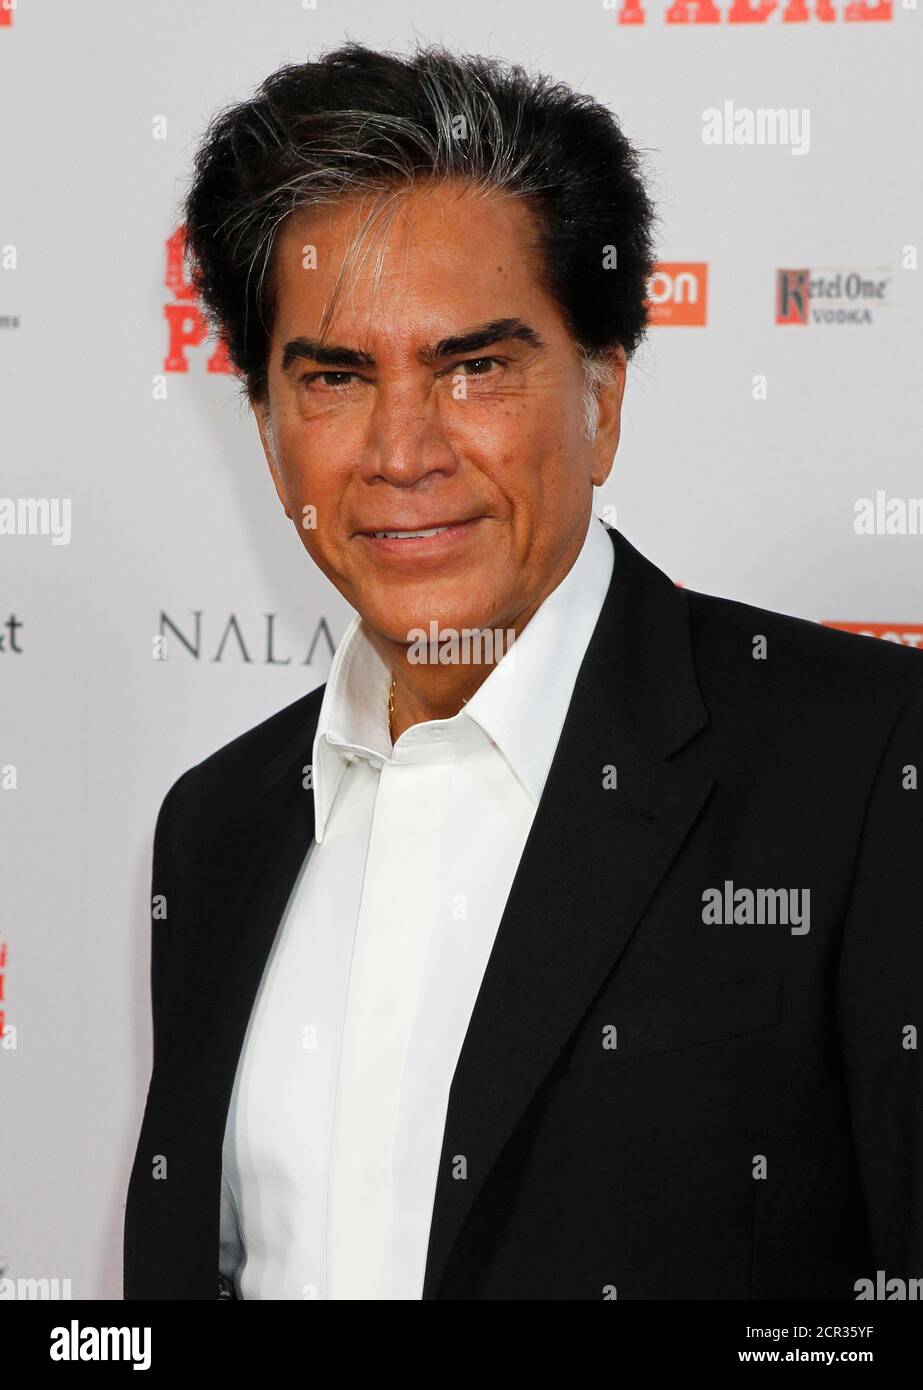 Venezuelan singer Jose Luis "El Puma" Rodriguez arrives at the premiere of  the new film "Casa de mi Padre" in Hollywood, California March 14, 2012.  REUTERS/Fred Prouser (UNITED STATES - Tags: ENTERTAINMENT